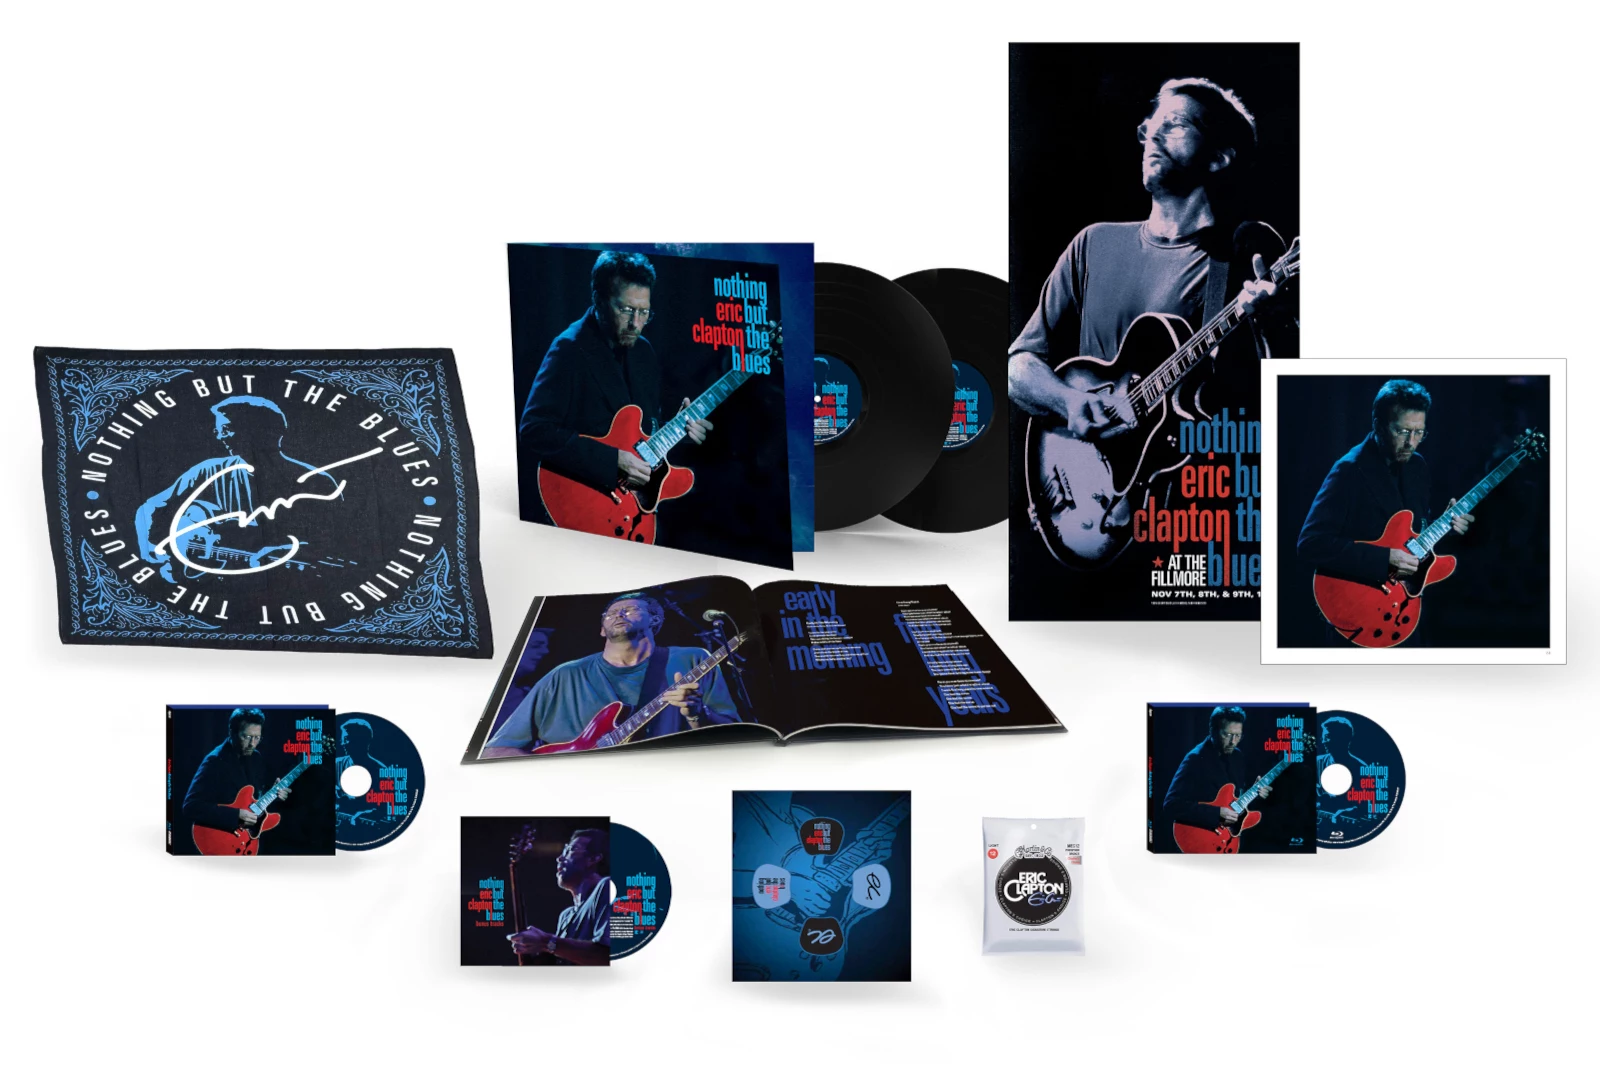 Win an Eric Clapton 'Nothing but the Blues' Deluxe Box Set